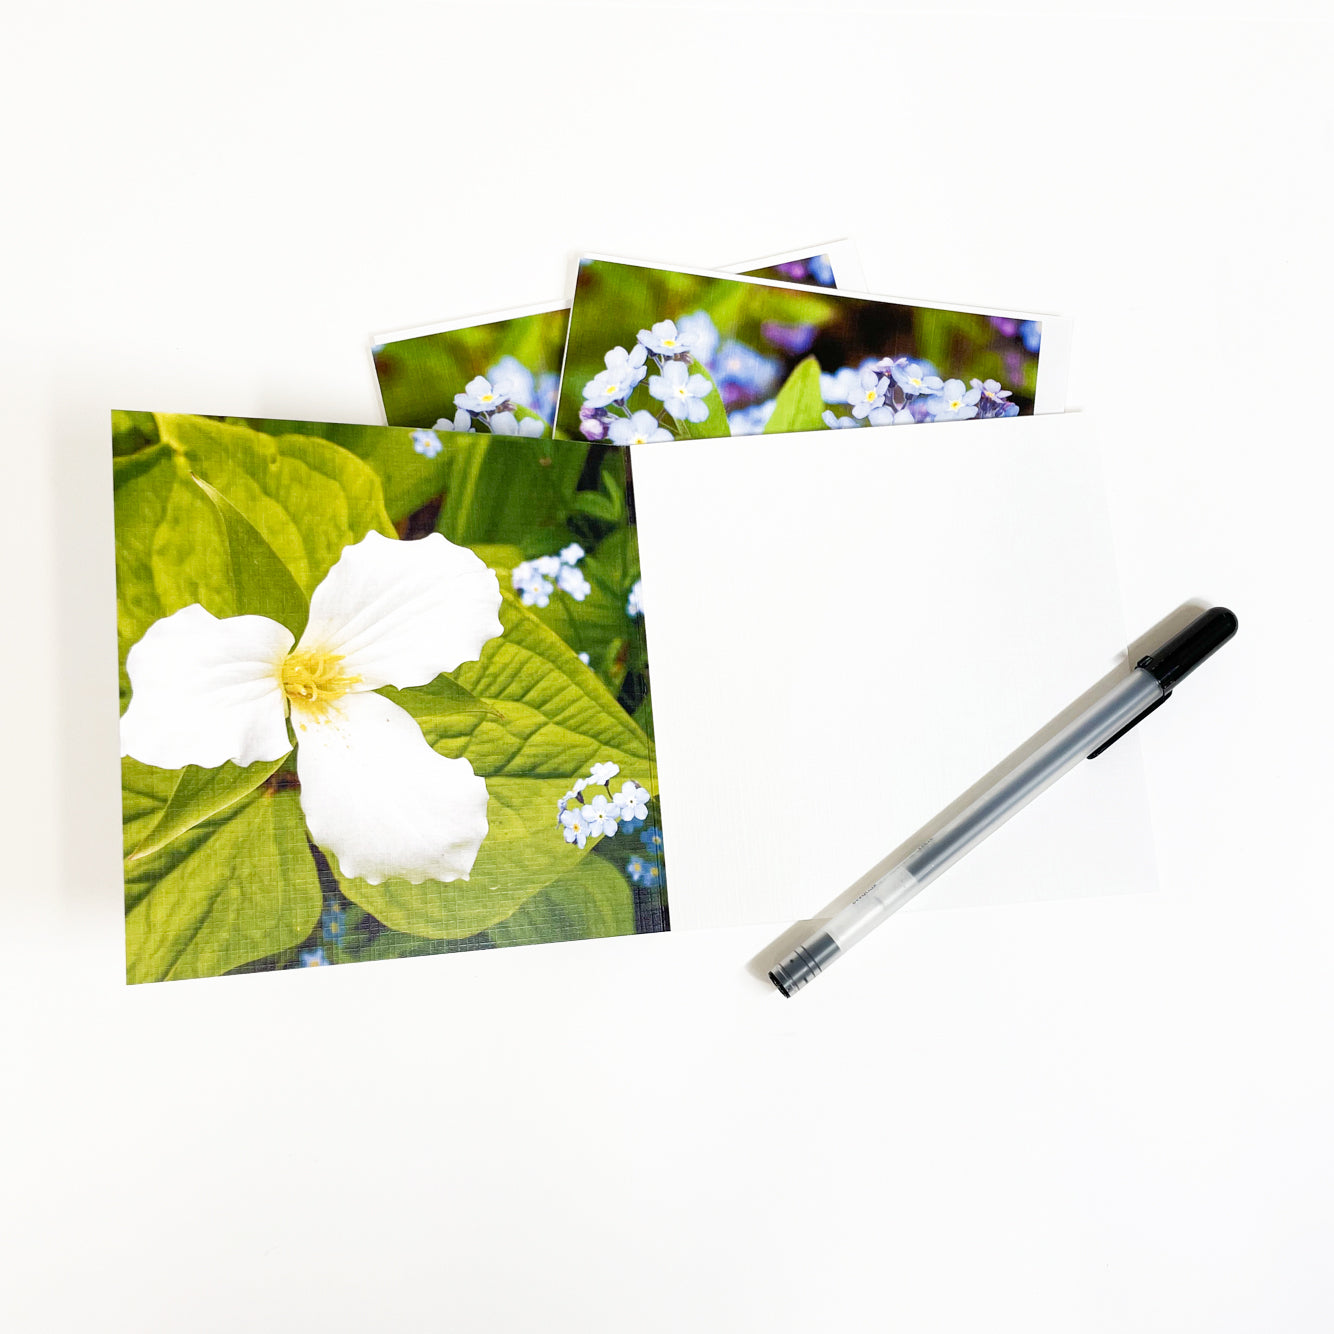 Forget-Me-Nots Greeting Card